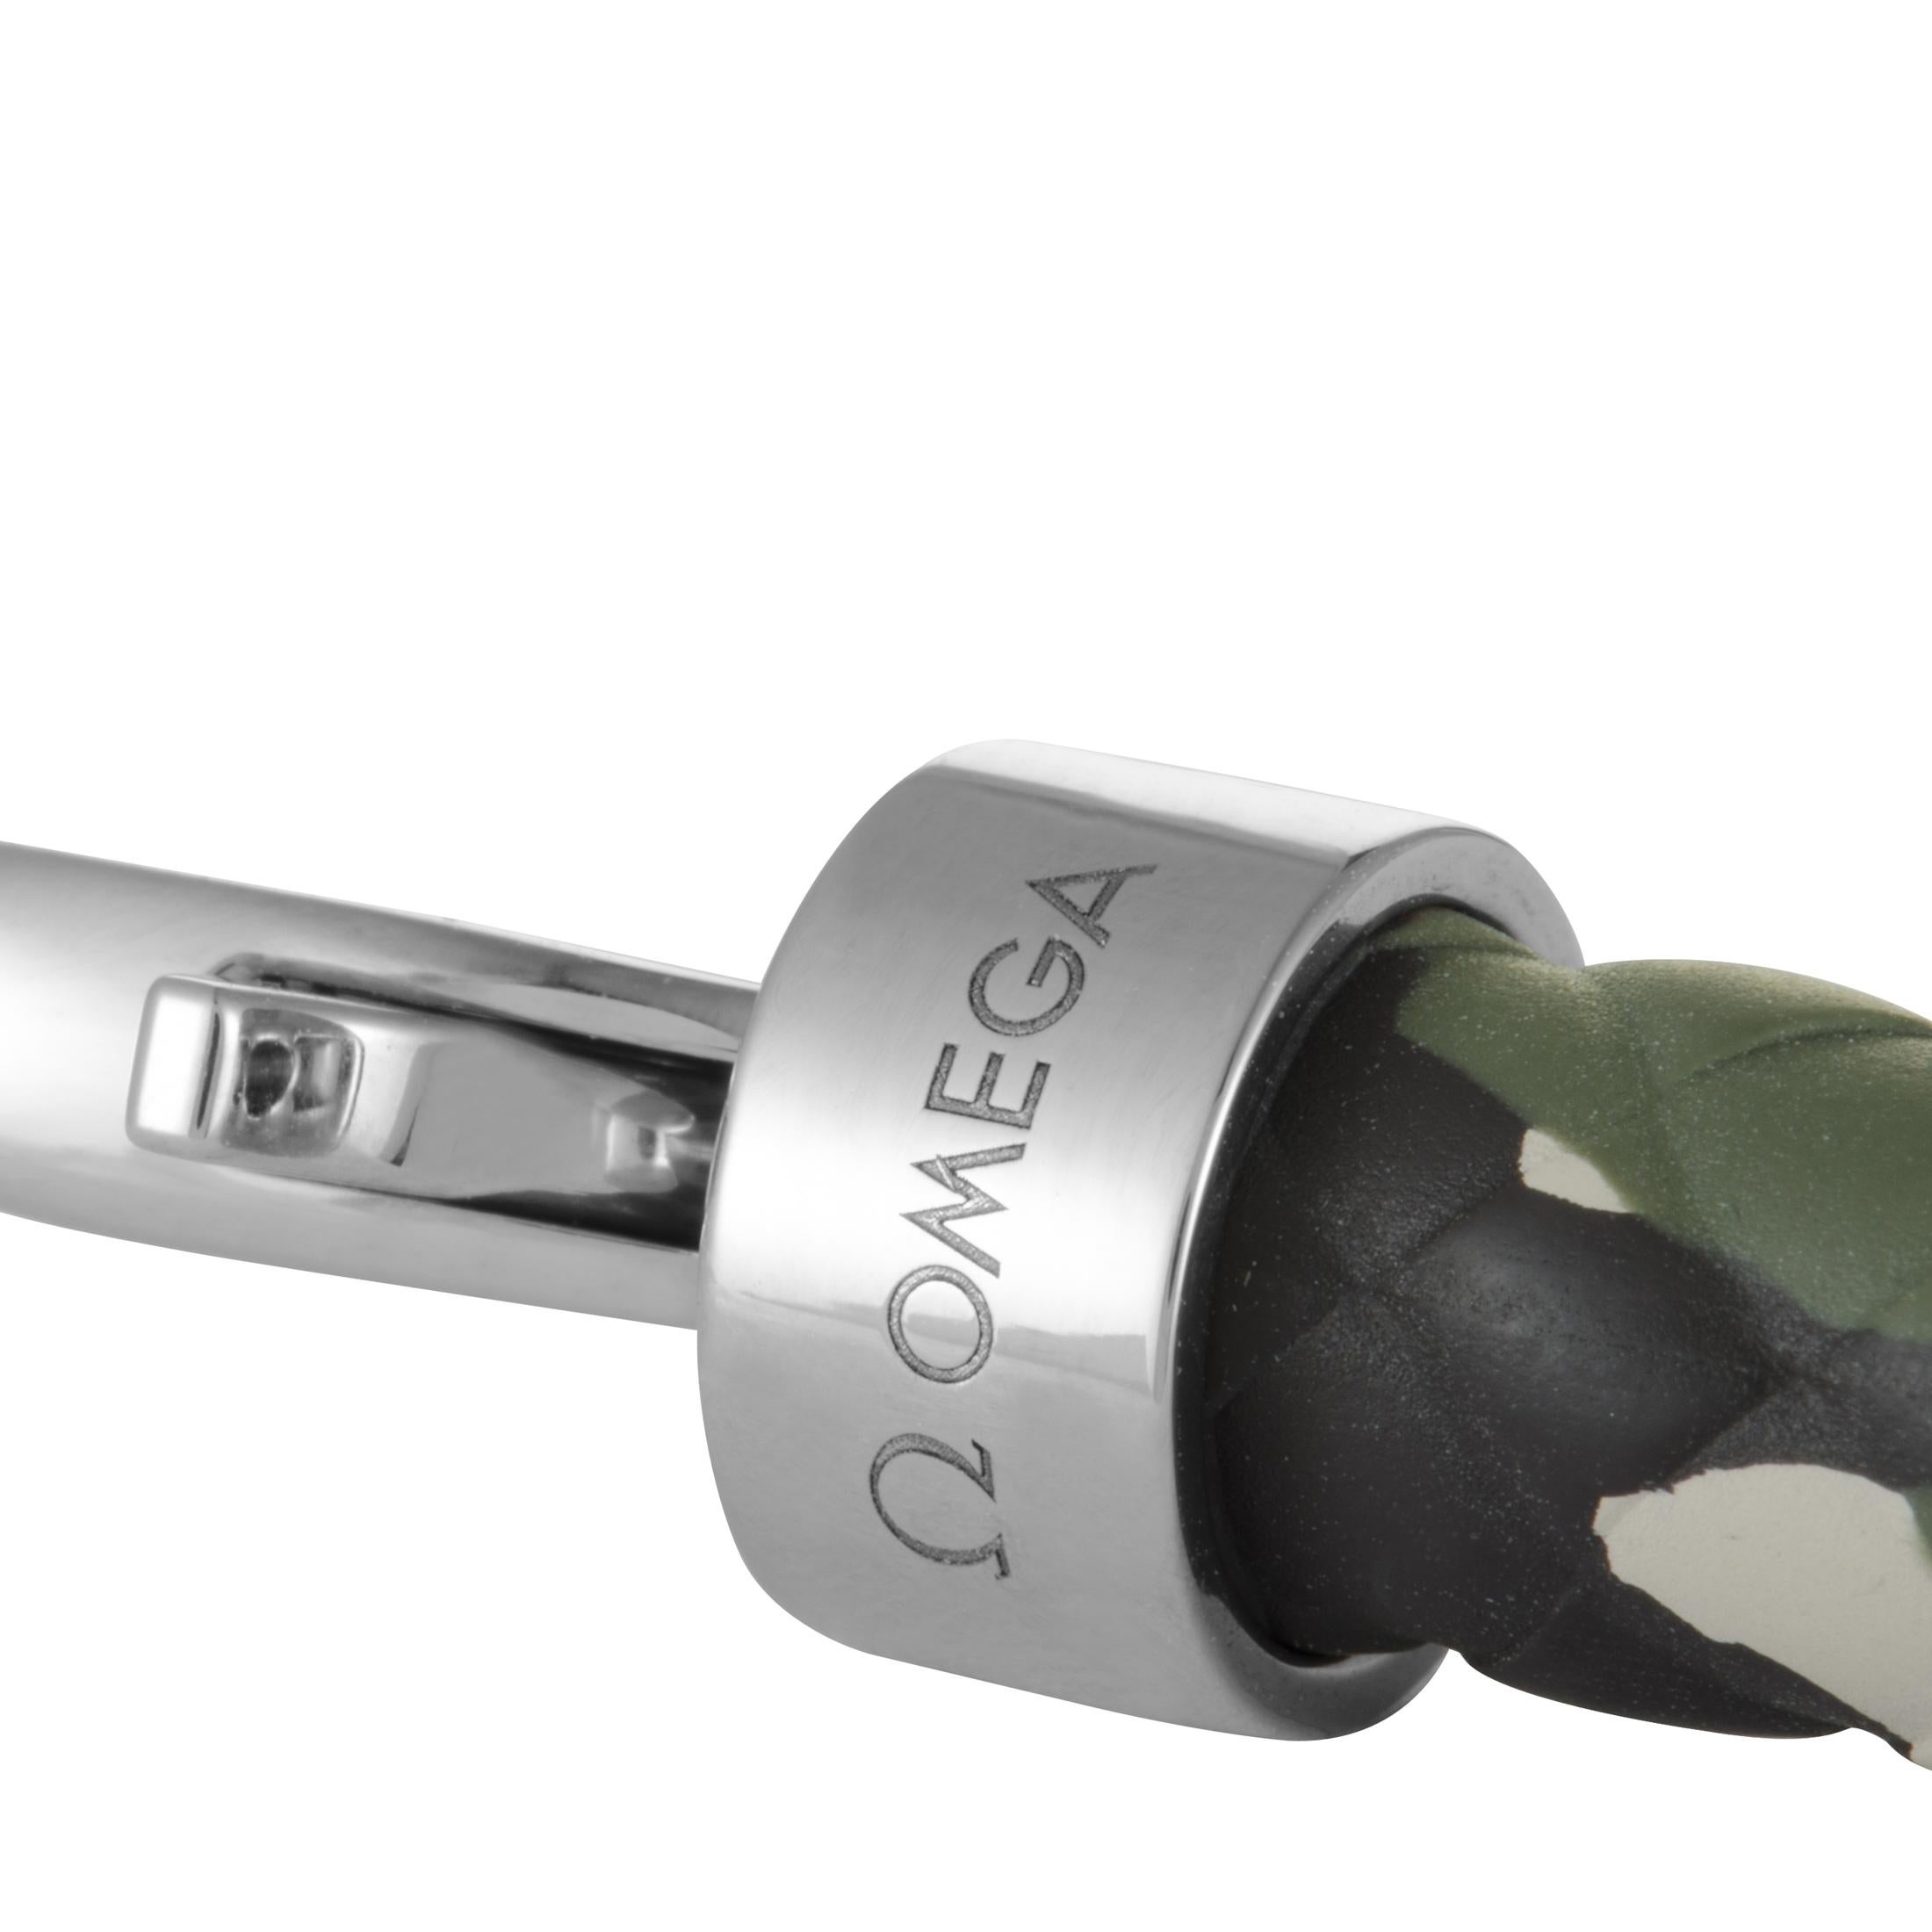 The Omega “Aqua Sailing” bracelet is made out of stainless steel and green camo rubber and features lobster claw closure. The bracelet measures 9.00” in length and weighs 28.5 grams.
 
 Offered in brand new condition, this item includes a gift box.